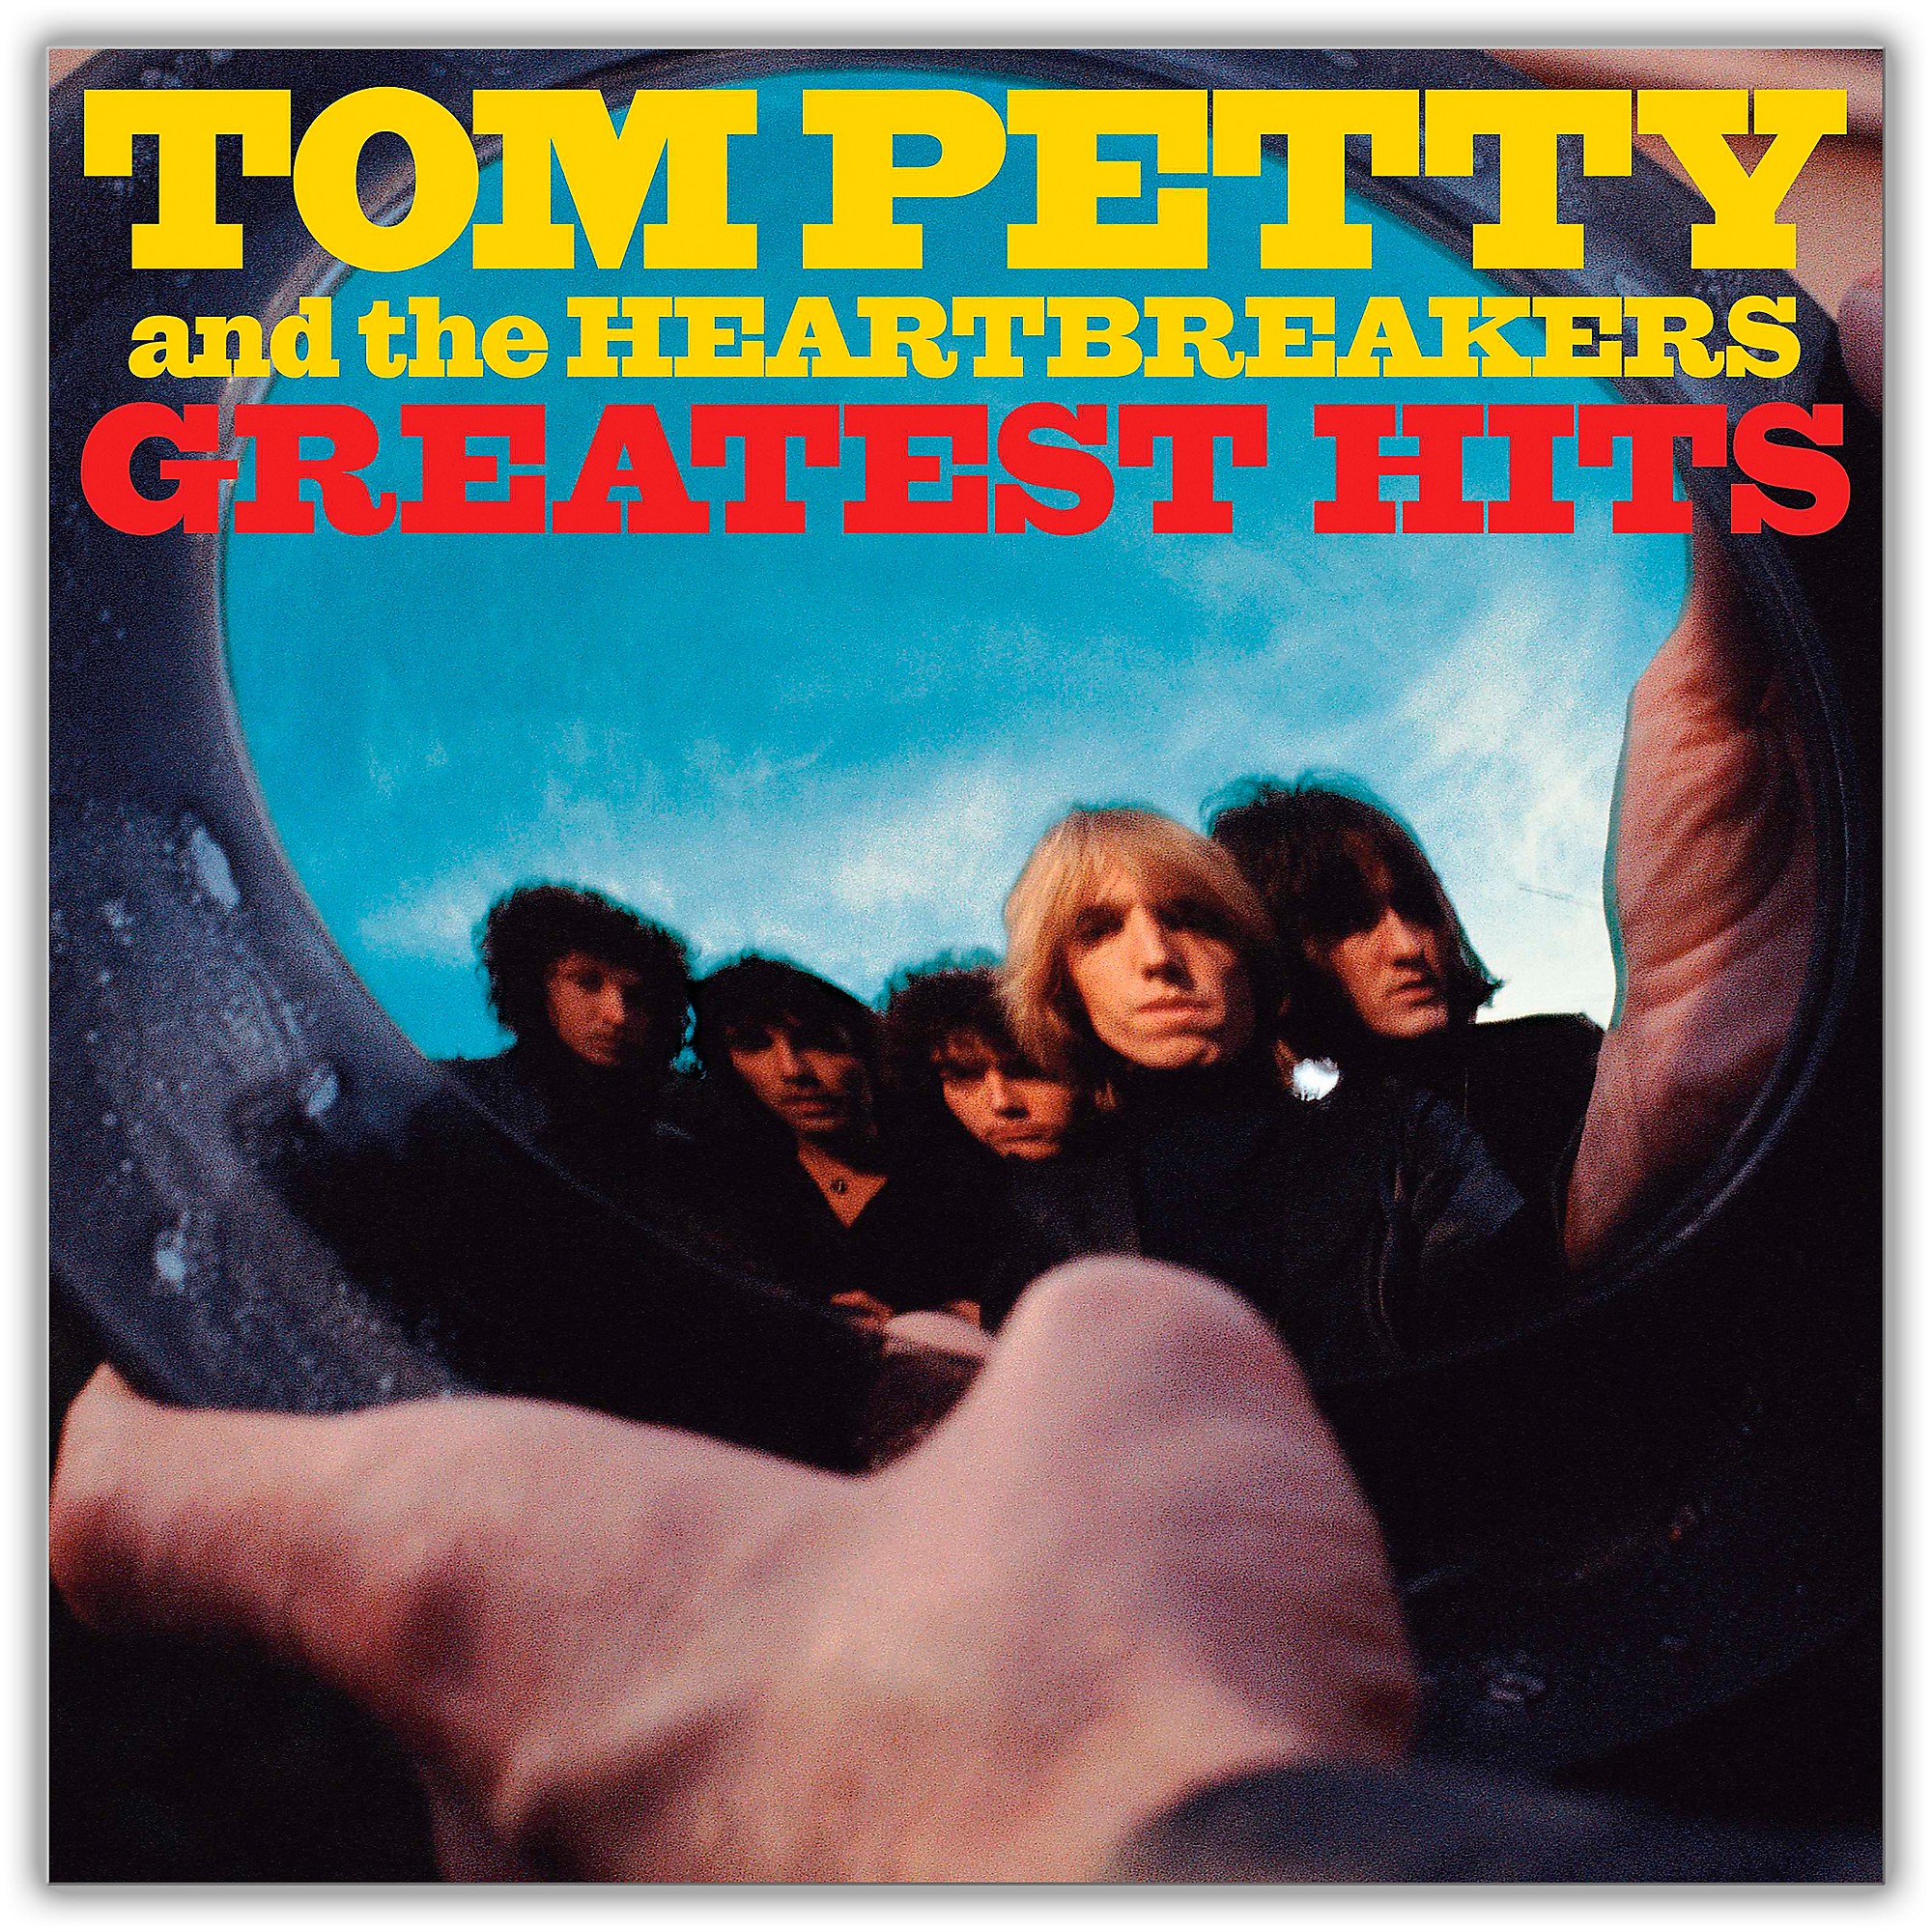 tom petty and the heartbreakers discography torrent